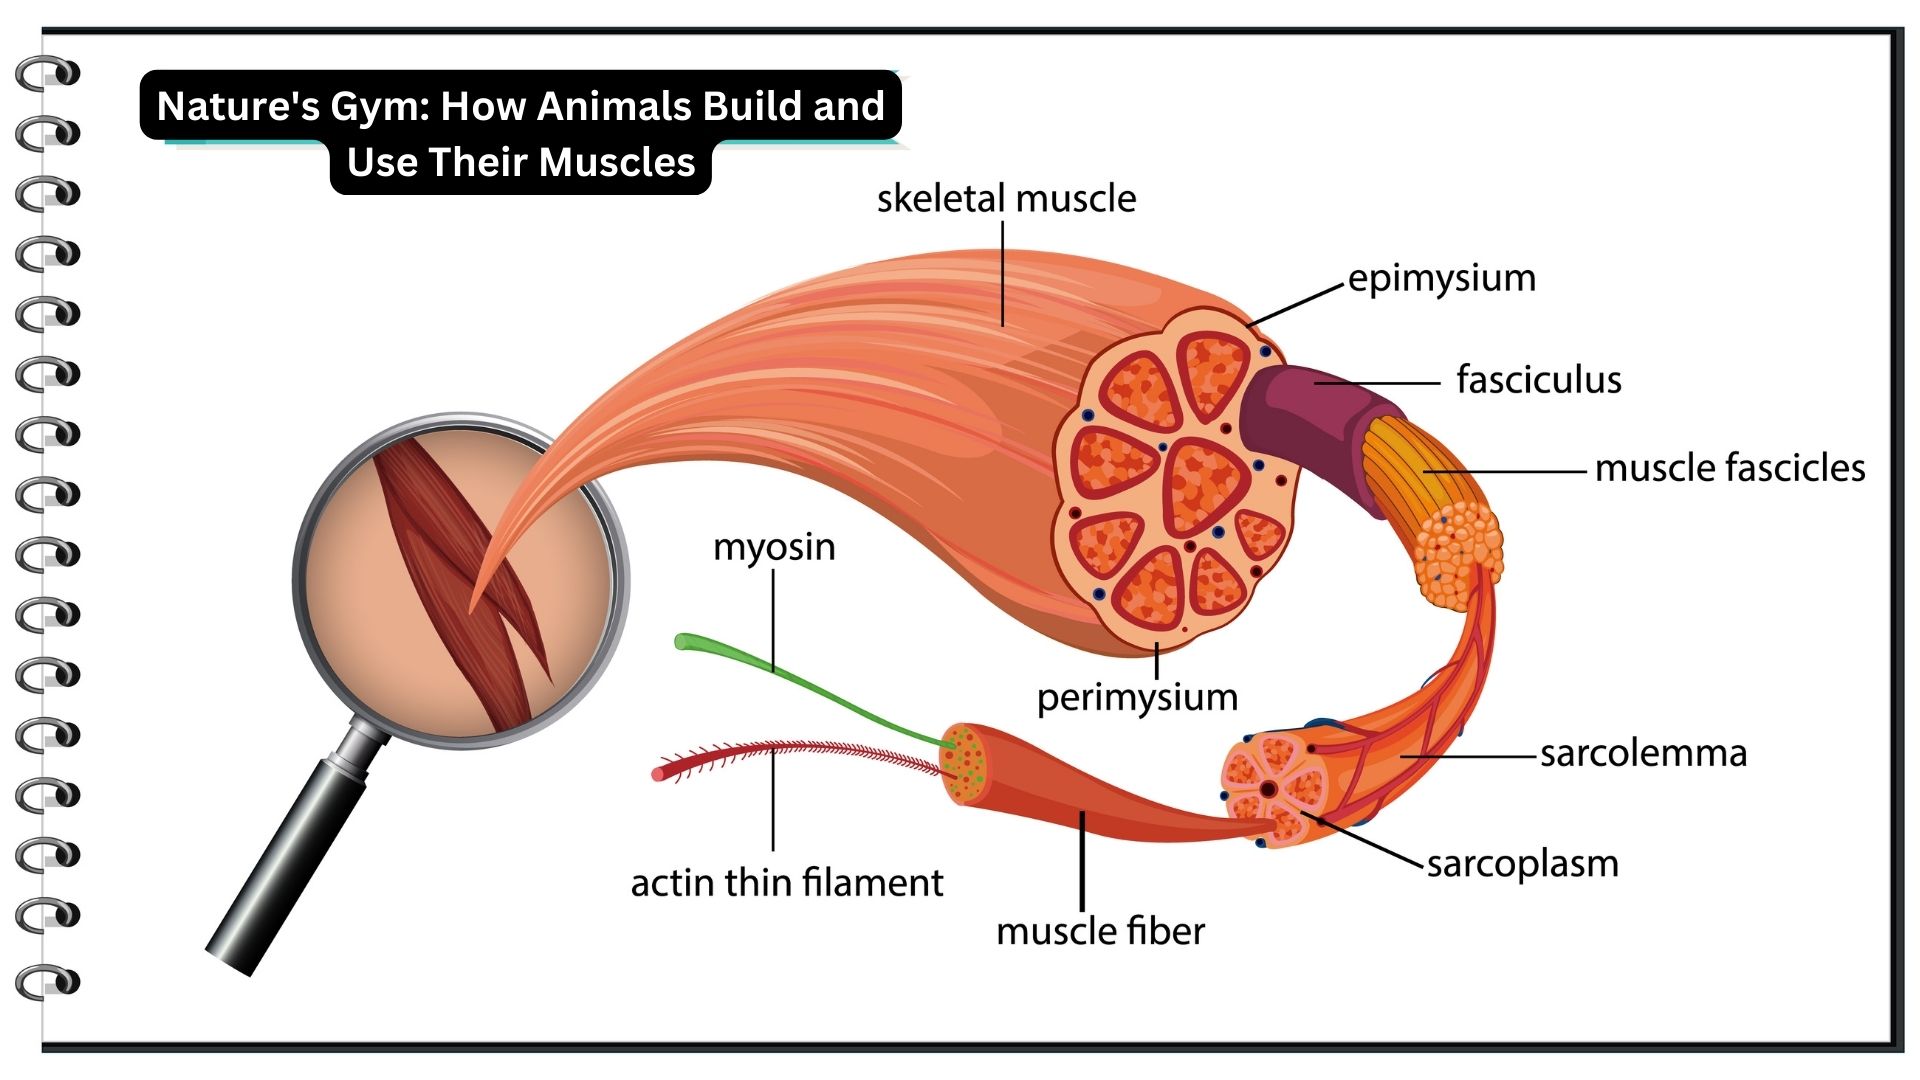 Discovering Animal Muscle Building